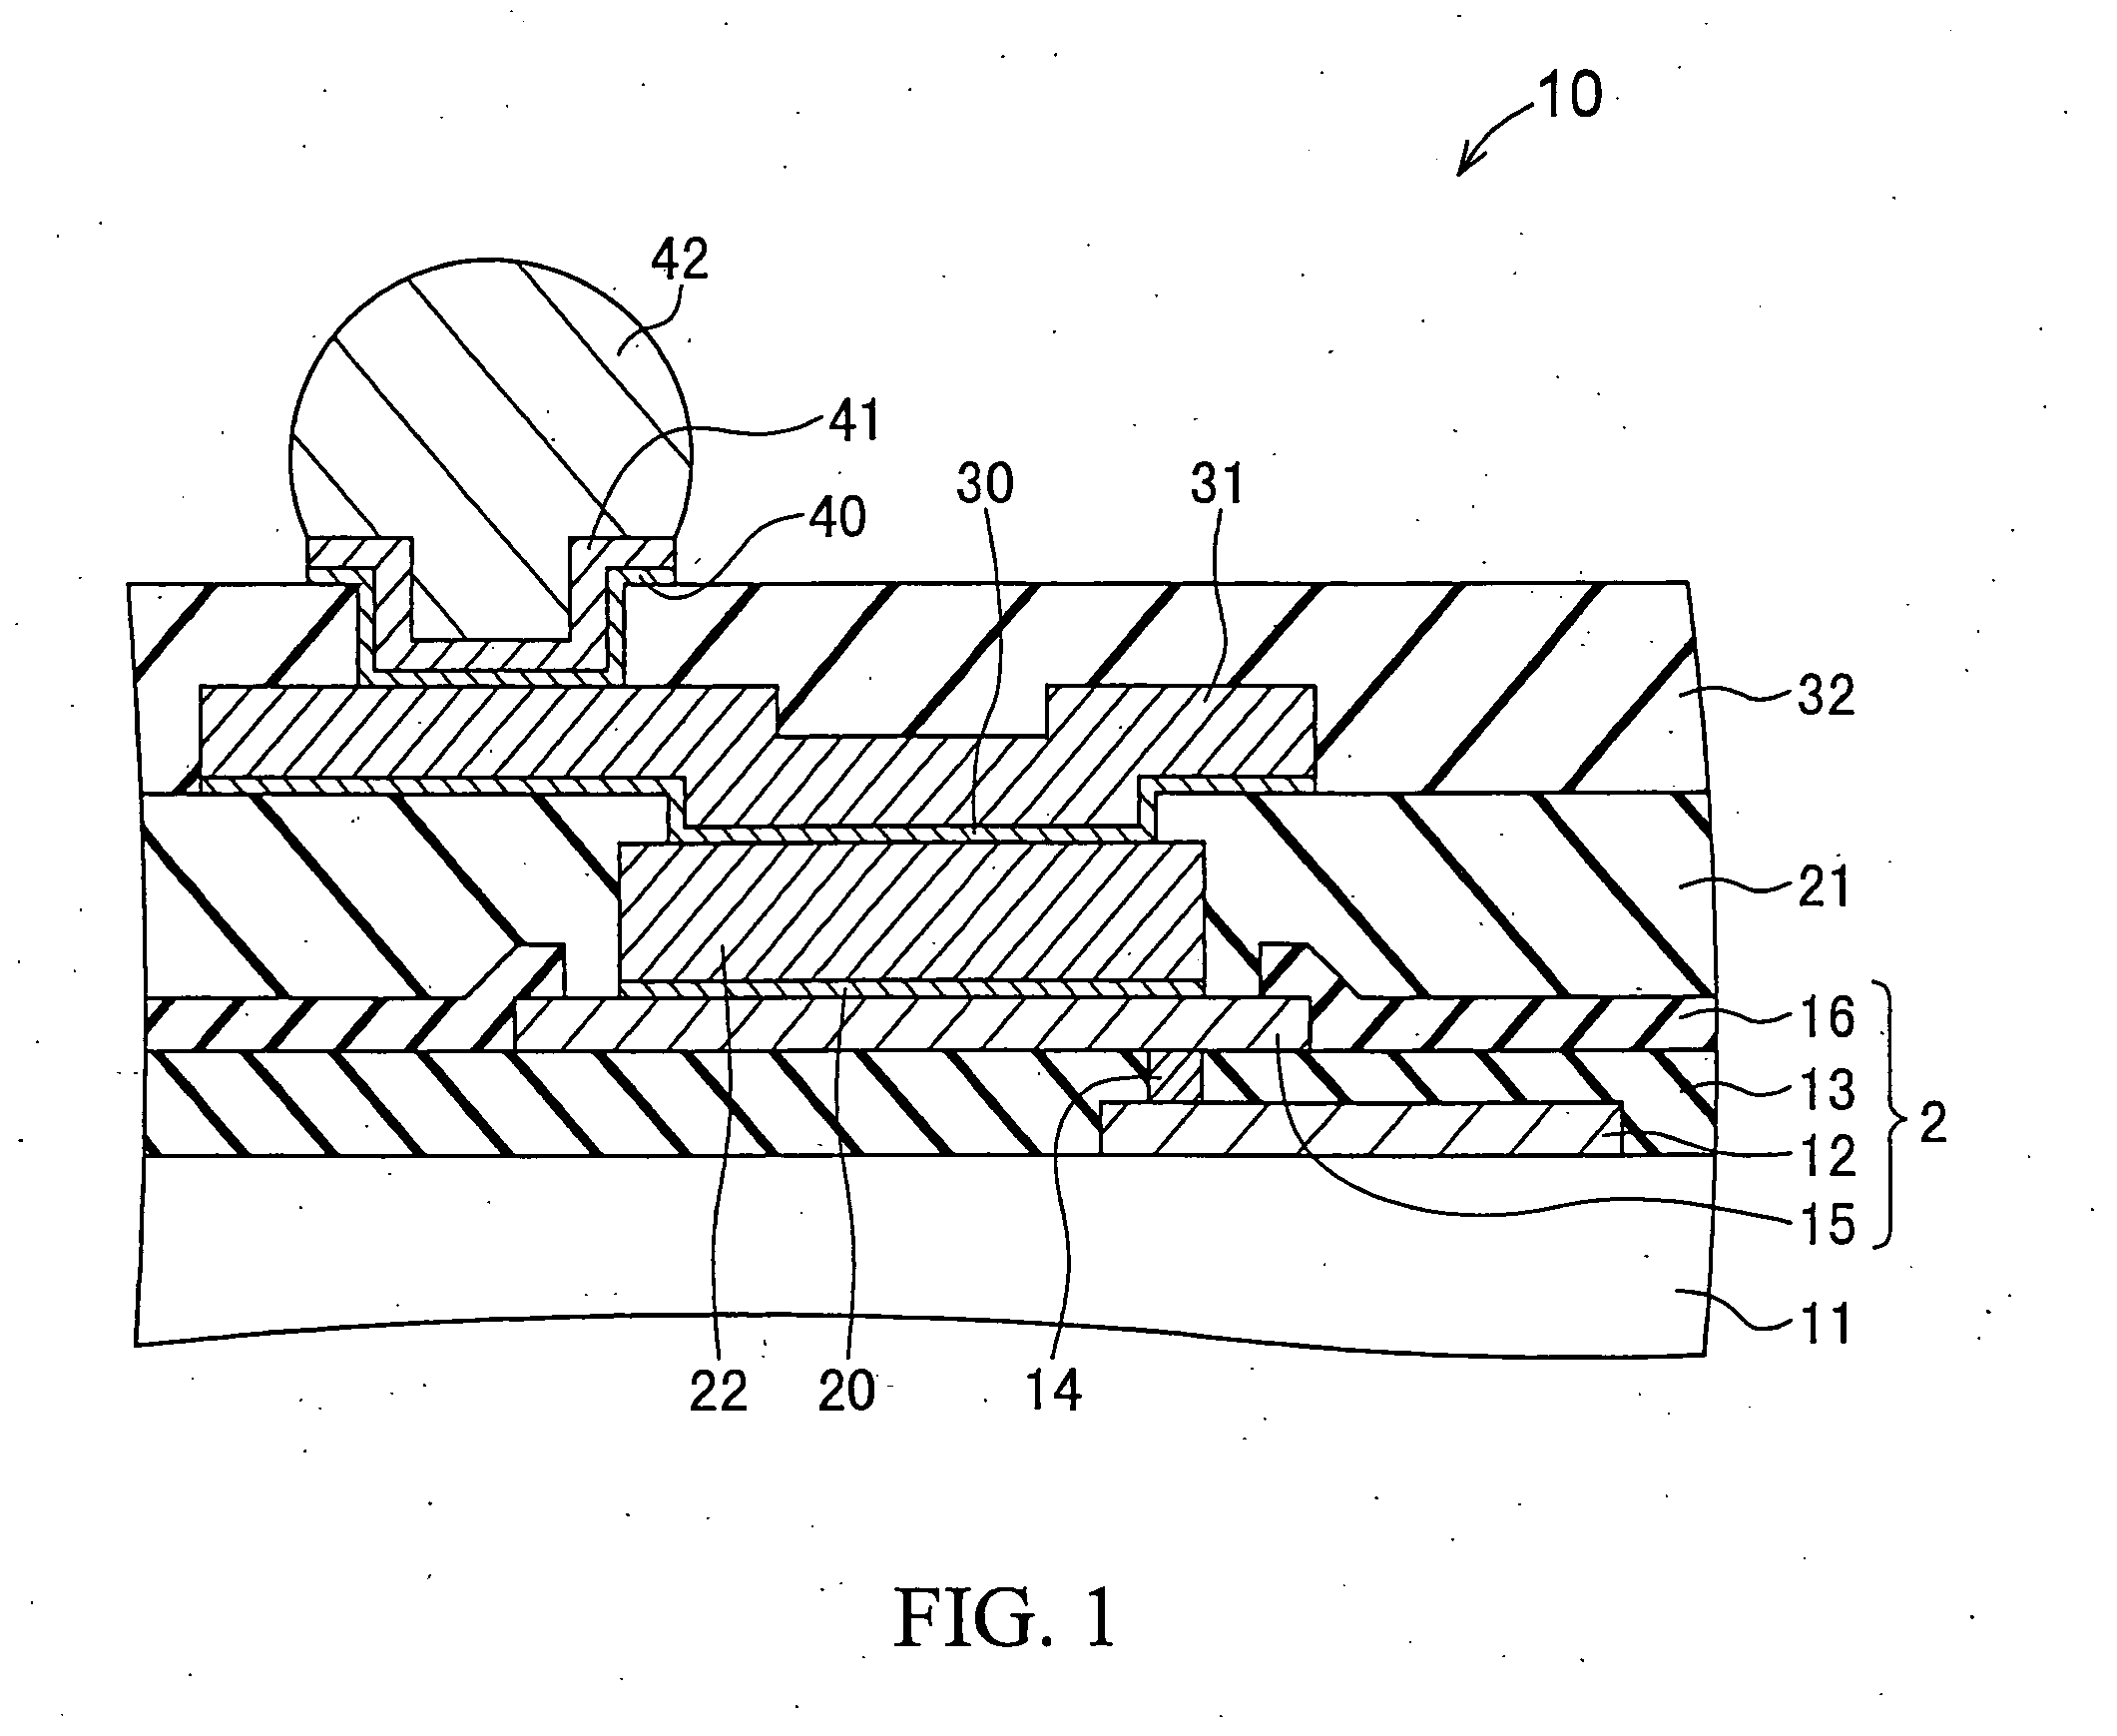 Semiconductor device and method of fabricating same